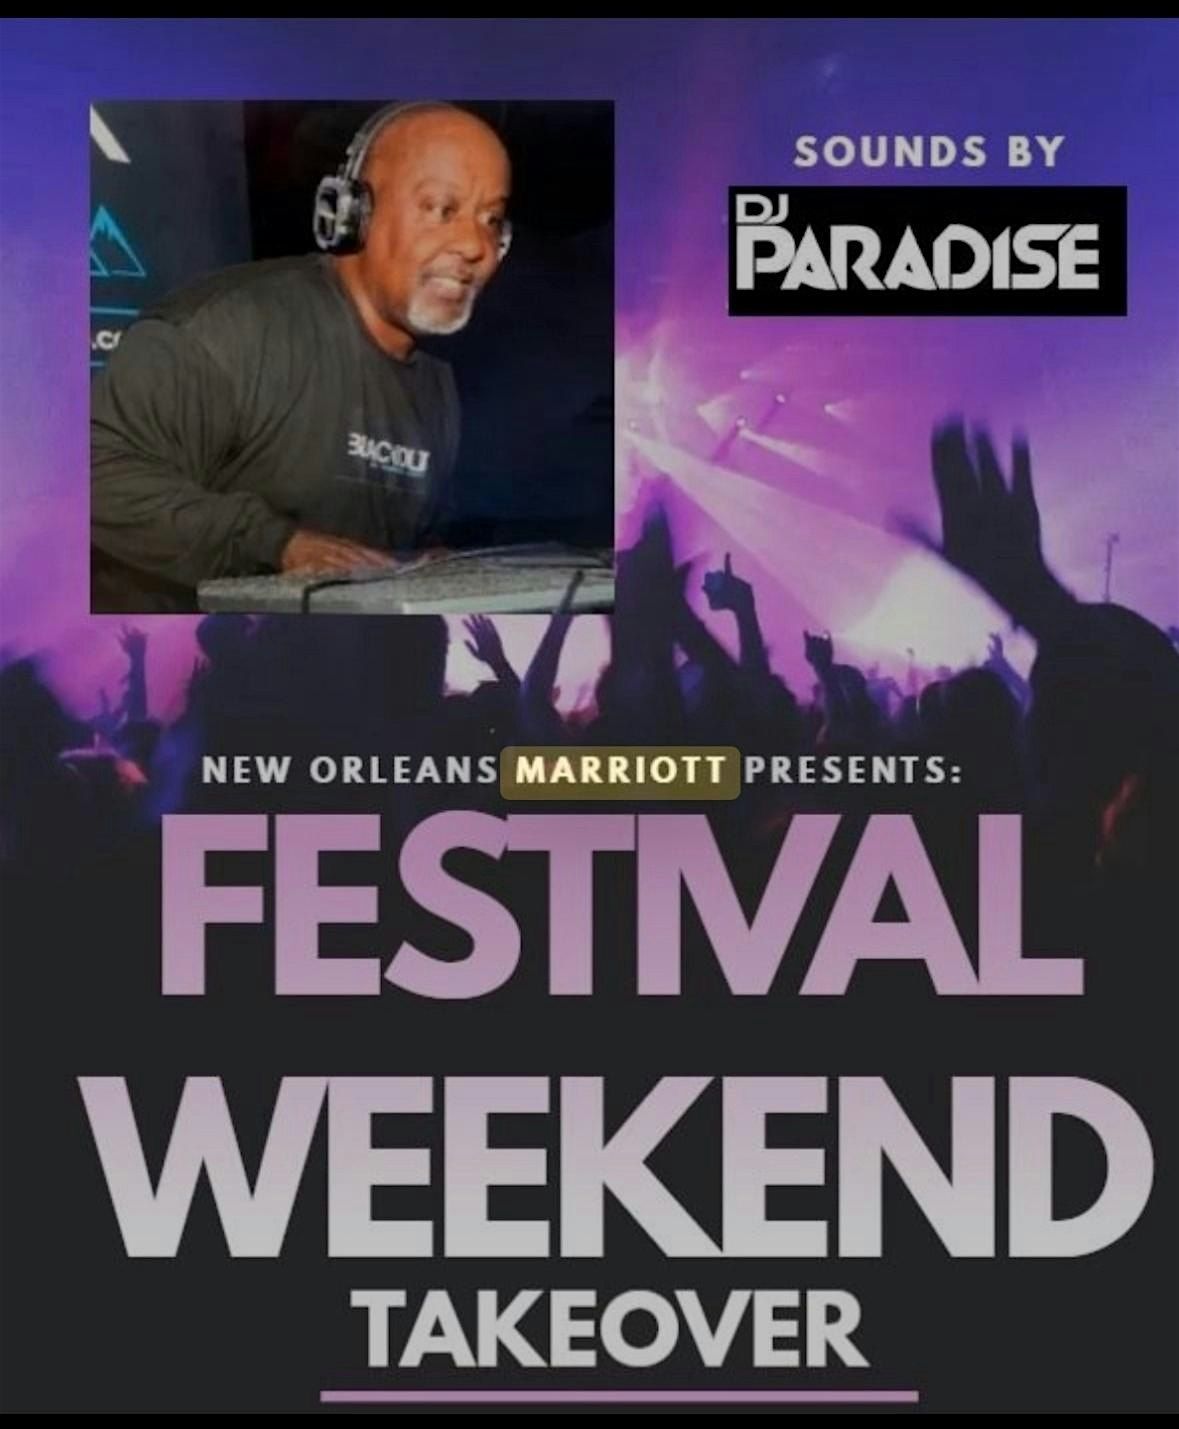 New Orleans Marriott Festival Weekend Takeover